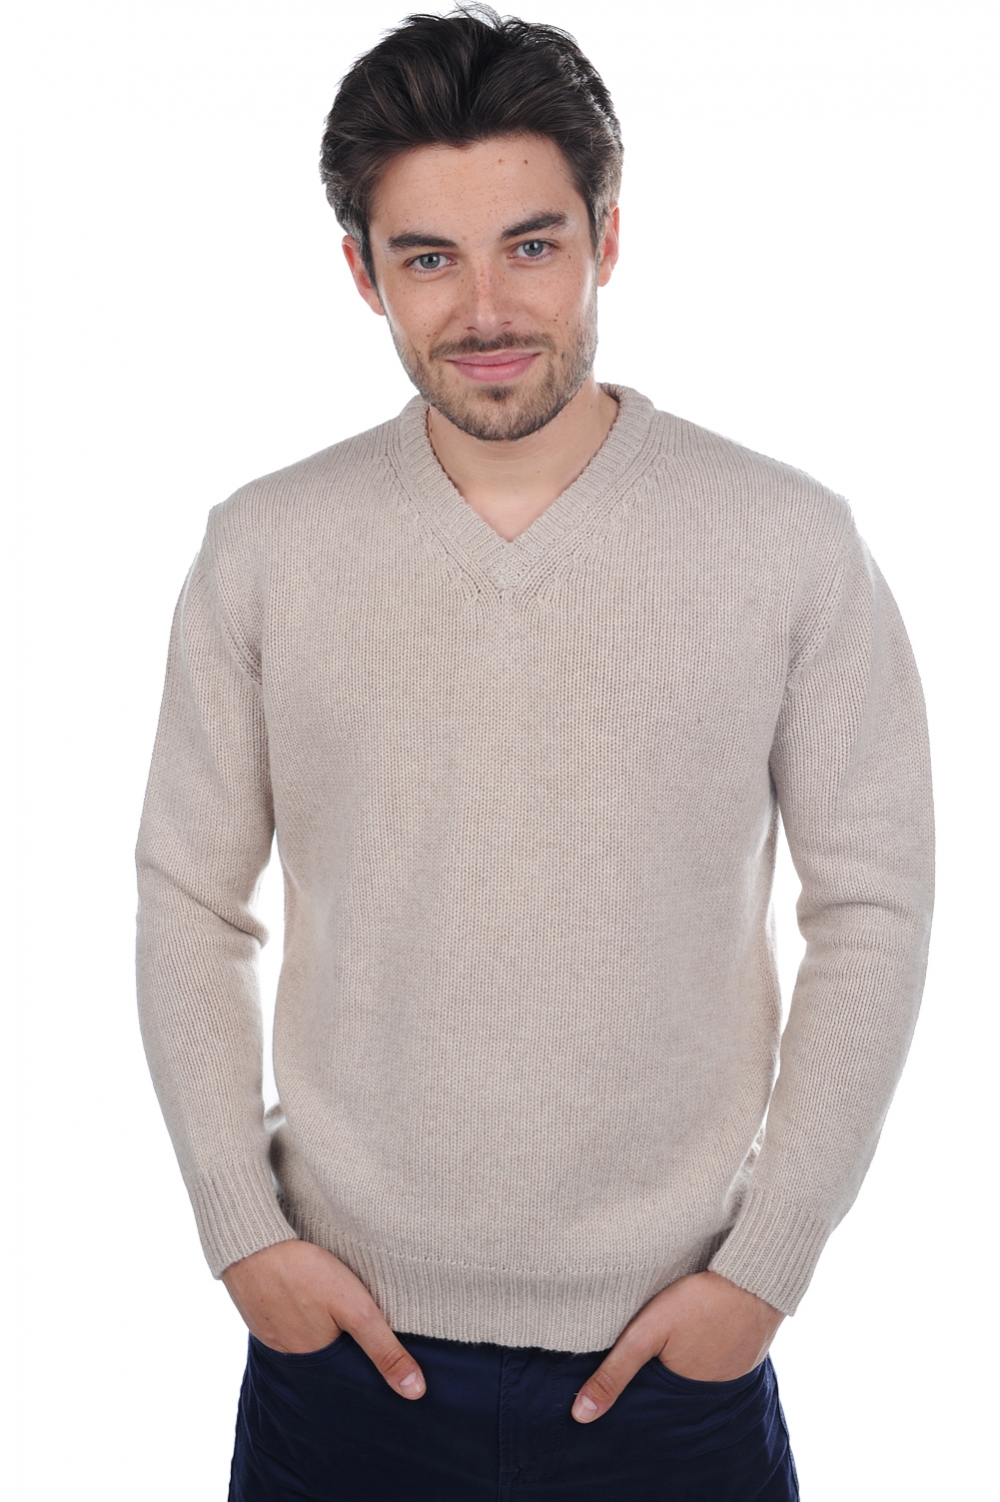 Cachemire pull homme col v atman natural beige 3xl